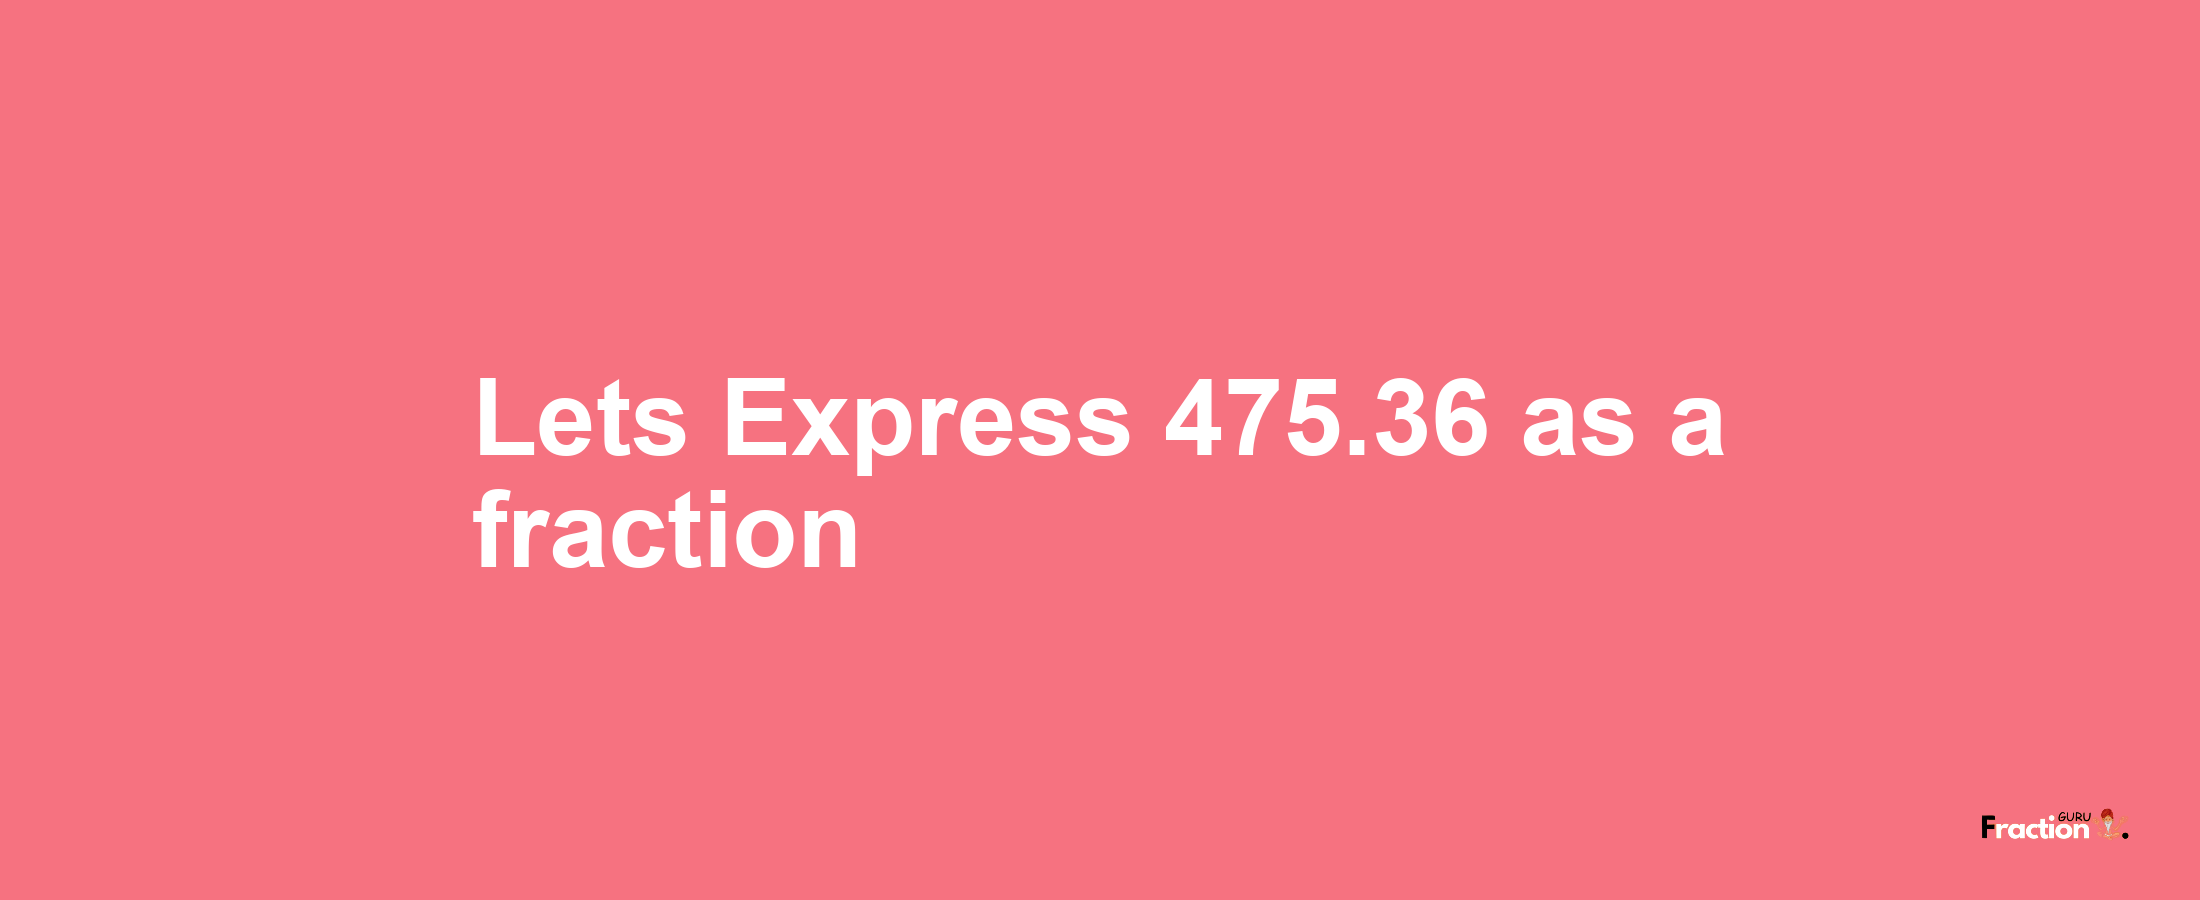 Lets Express 475.36 as afraction